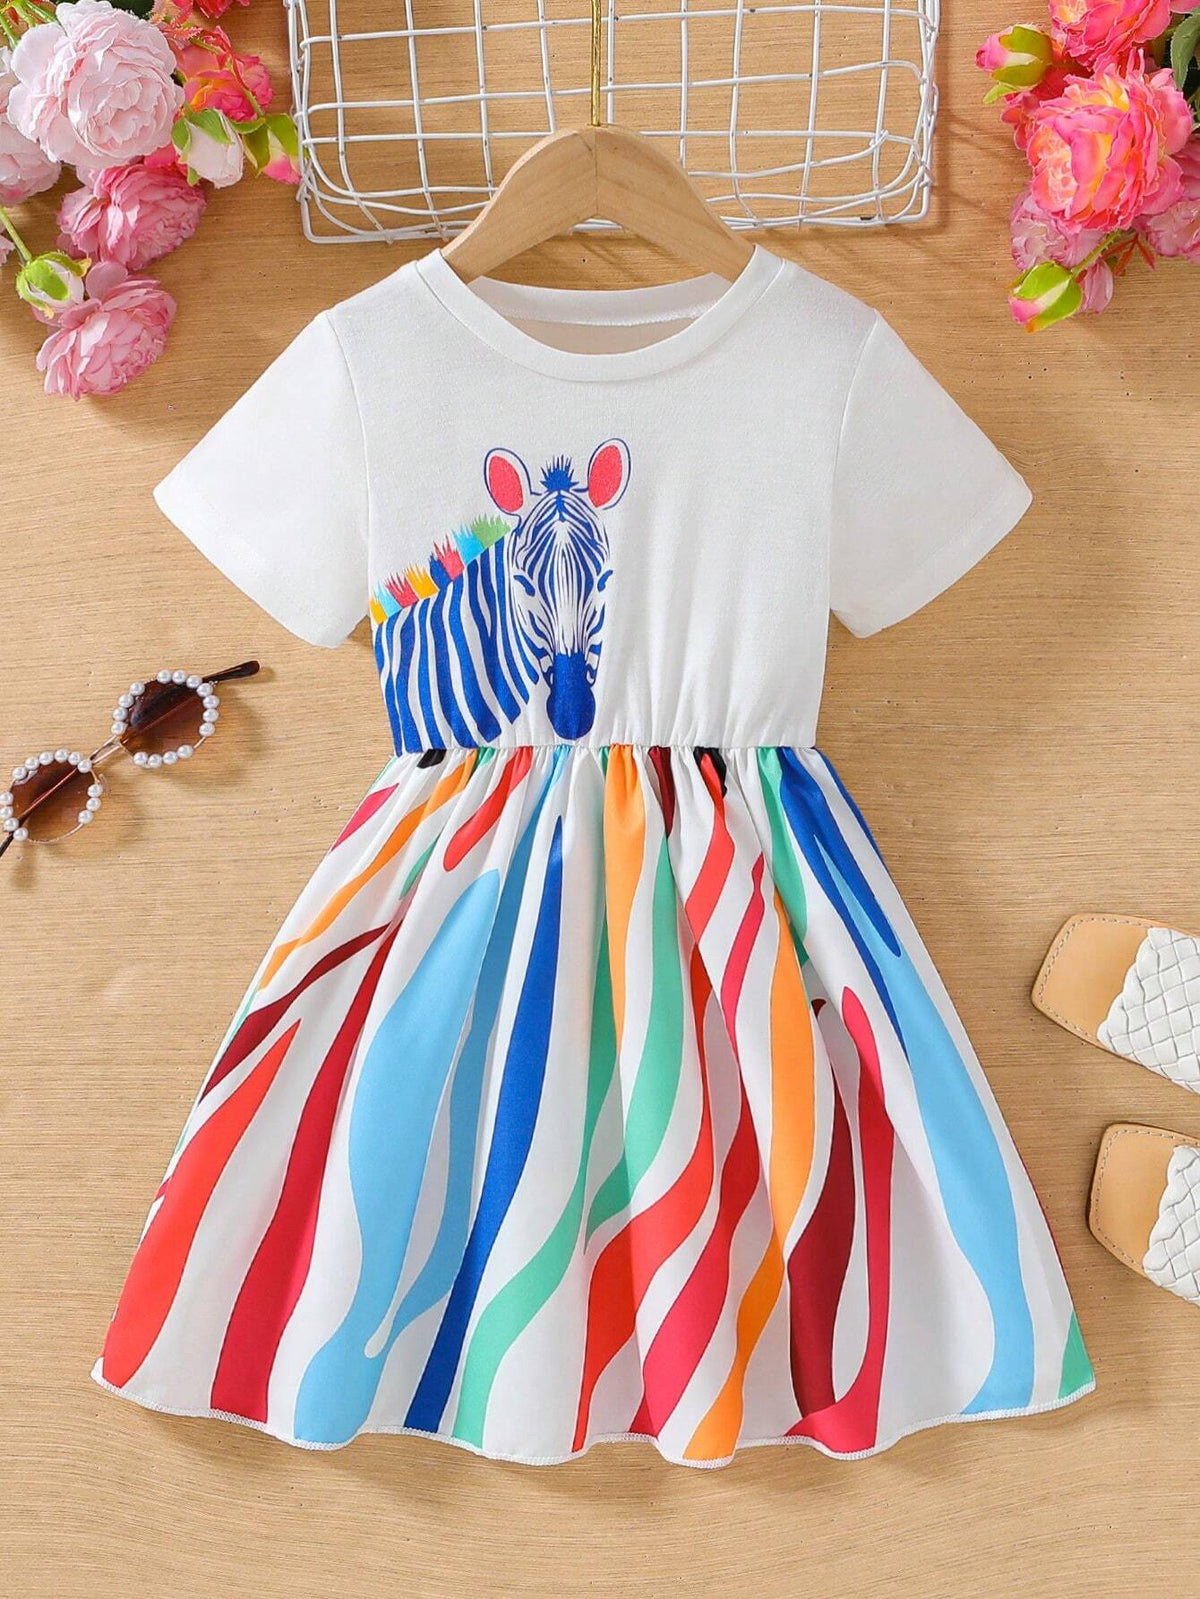 Toddler Girls Colorful Zebra Print Short Sleeve Round Neck Casual Cute Dress For Spring And Summer